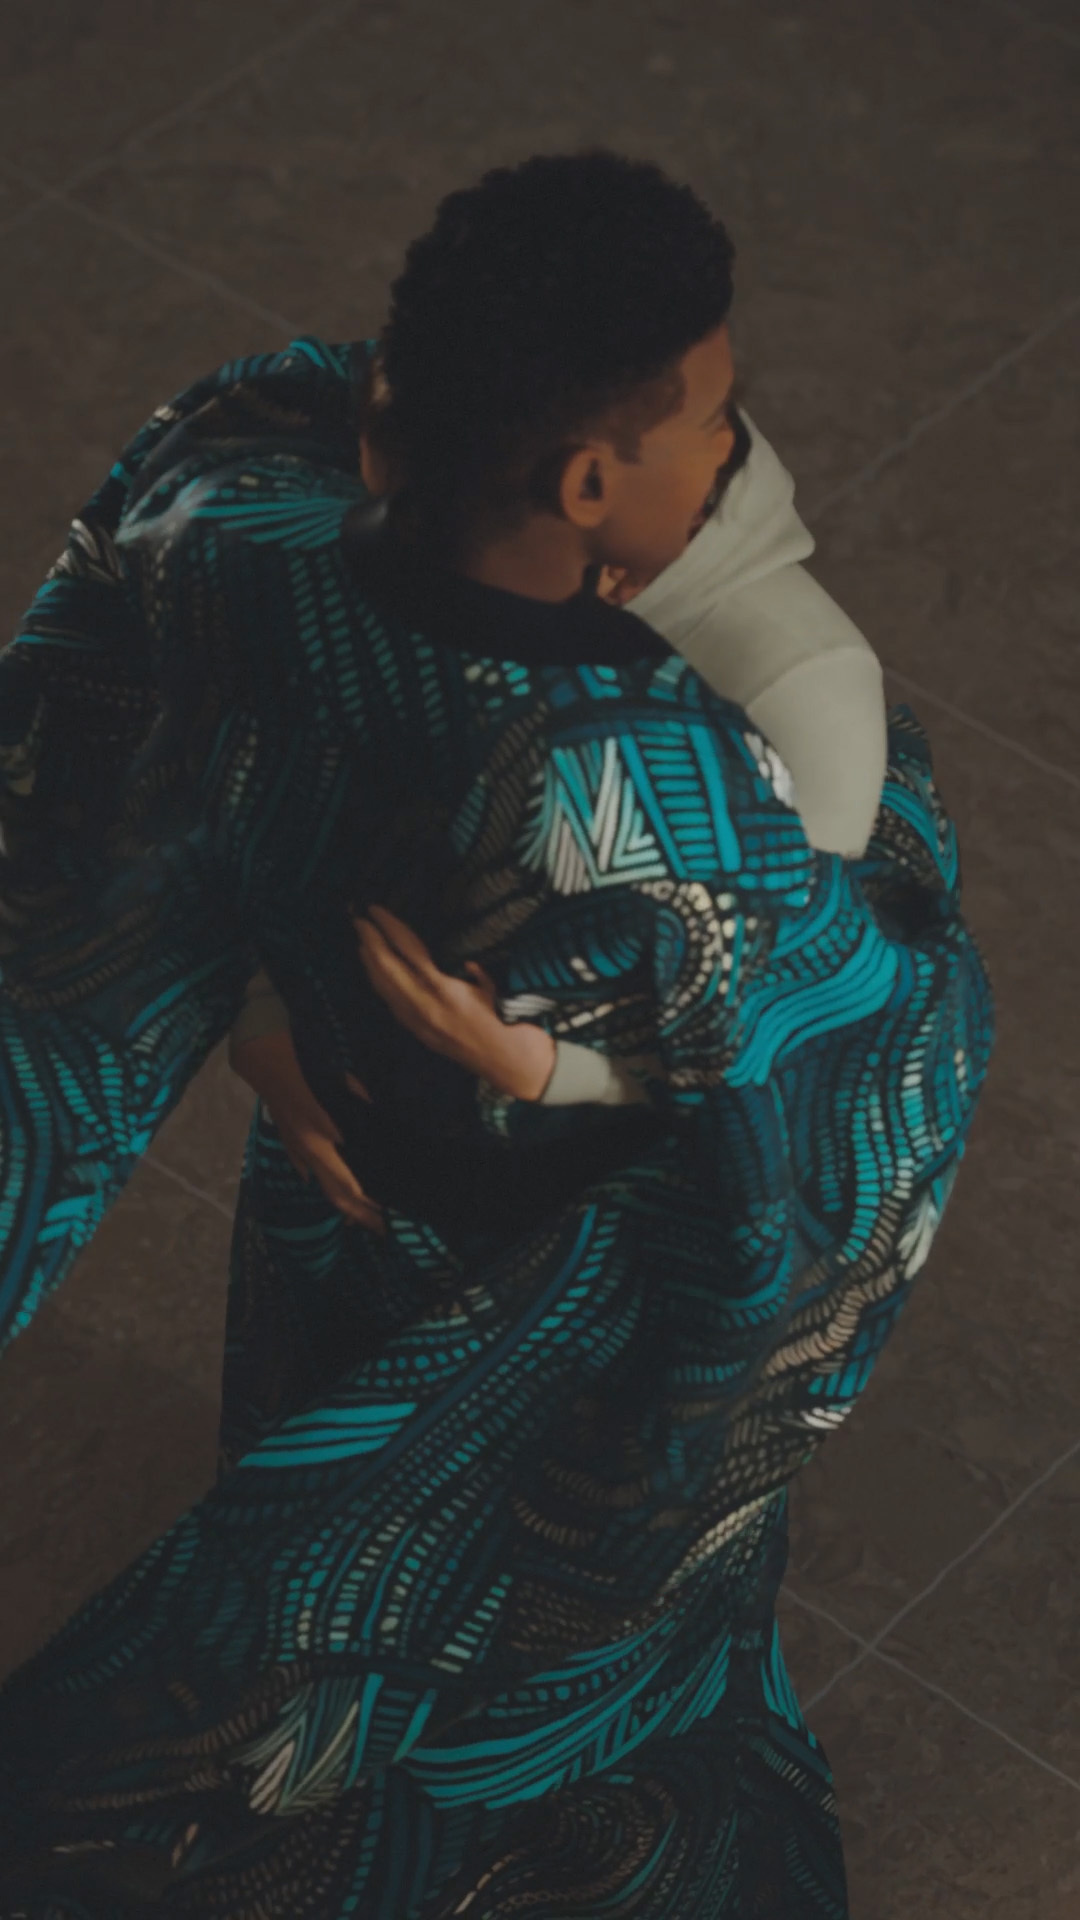 Two people hugging each other